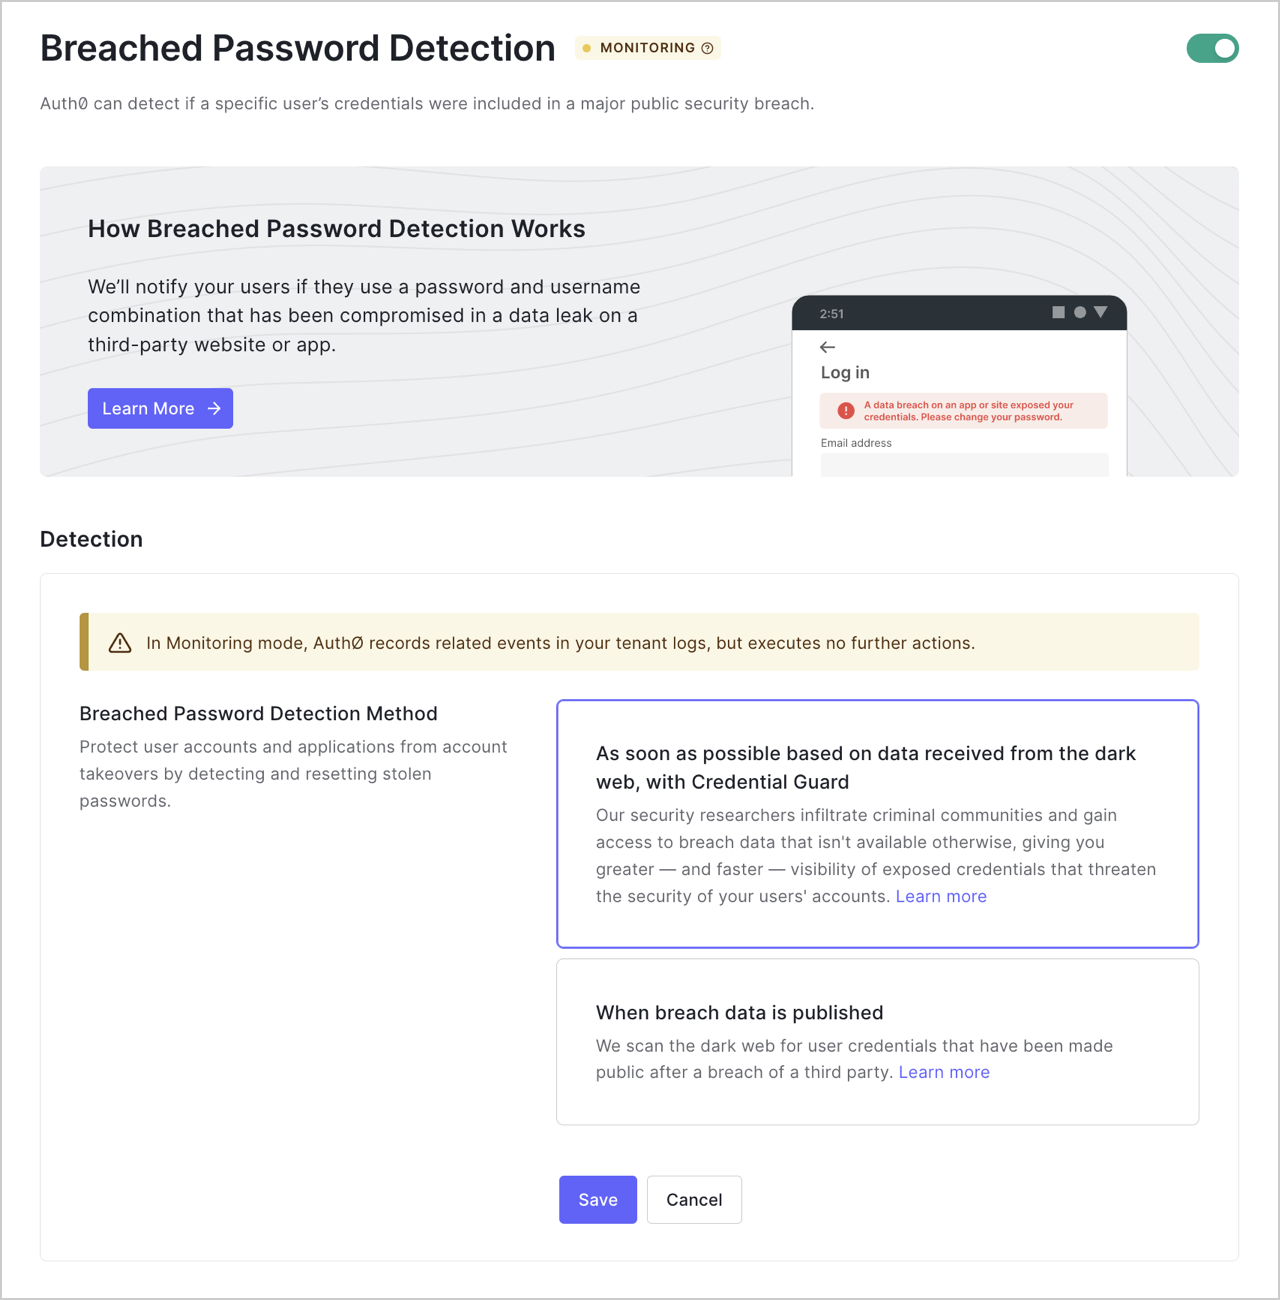 Dashboard > Security > Attack Protection > Breached Password > Detection